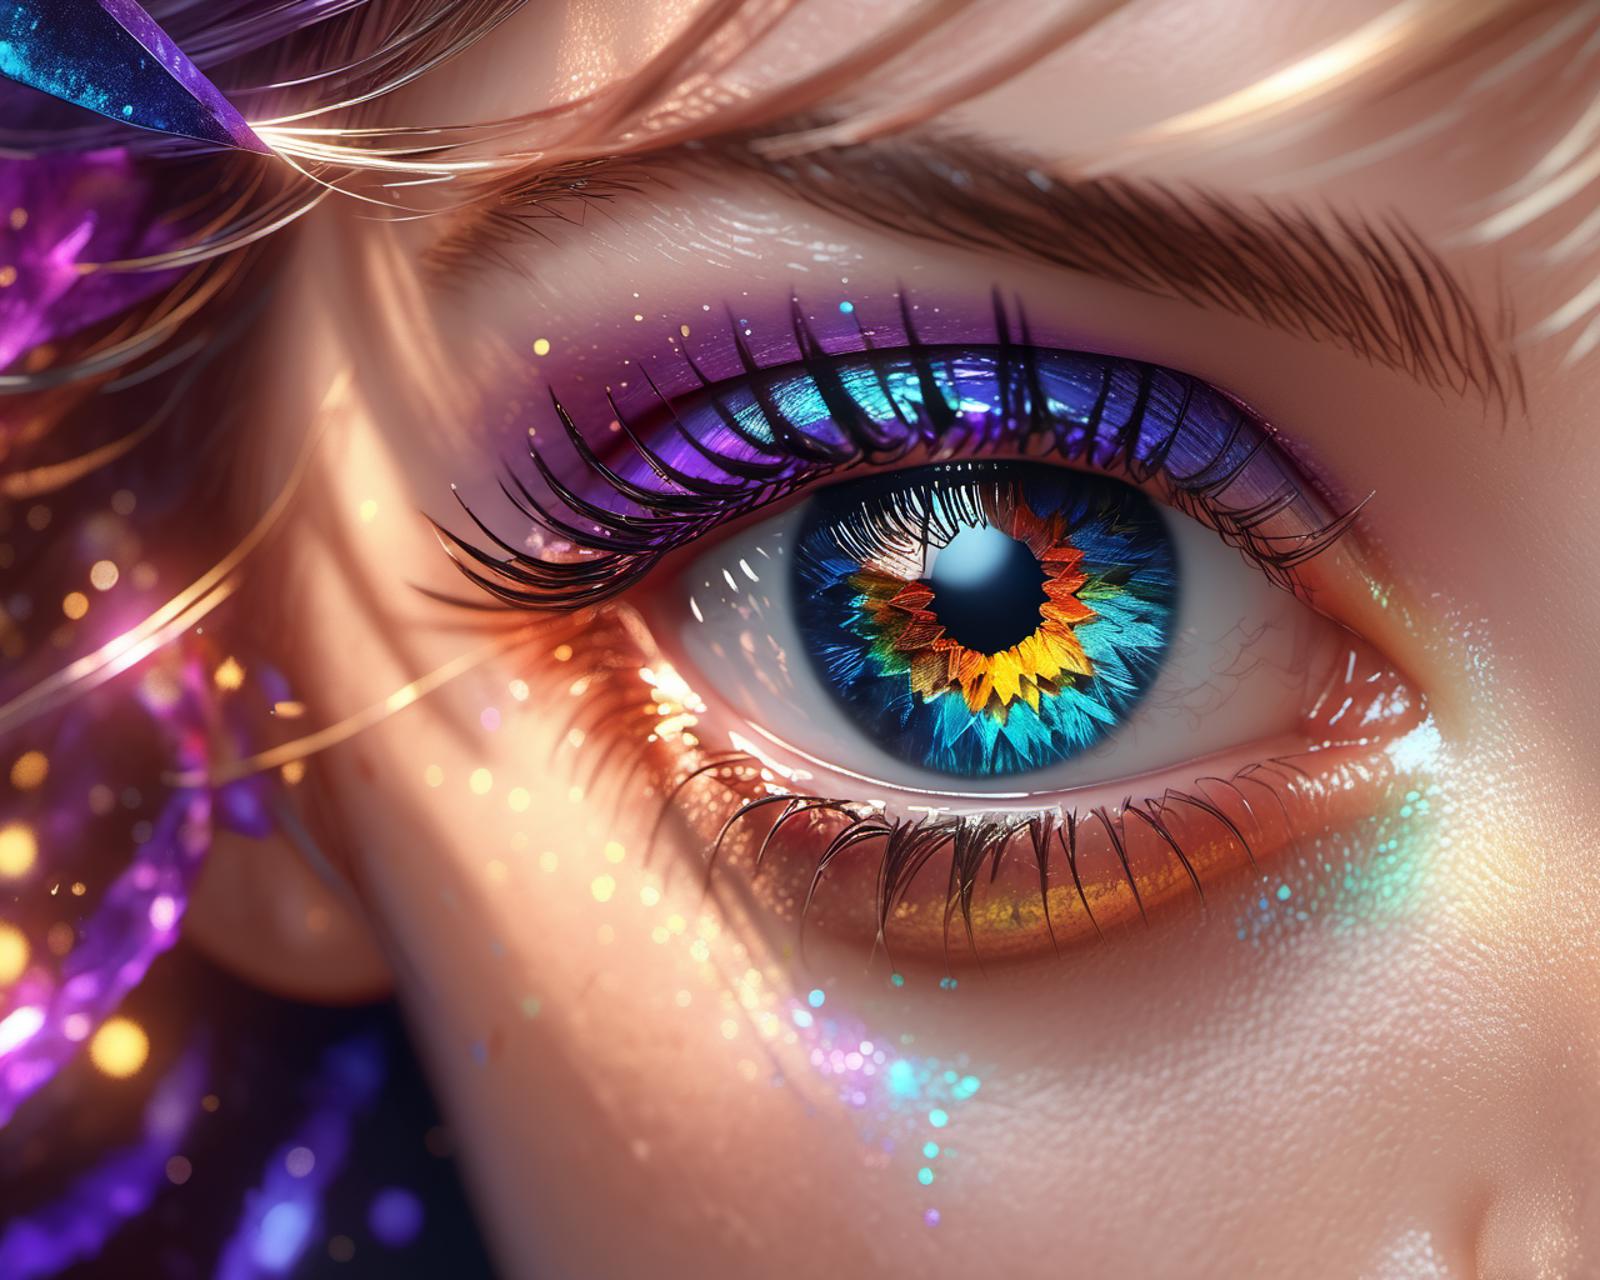 An artistic and colorful close-up of a woman's eye with a purple and blue eye shadow.